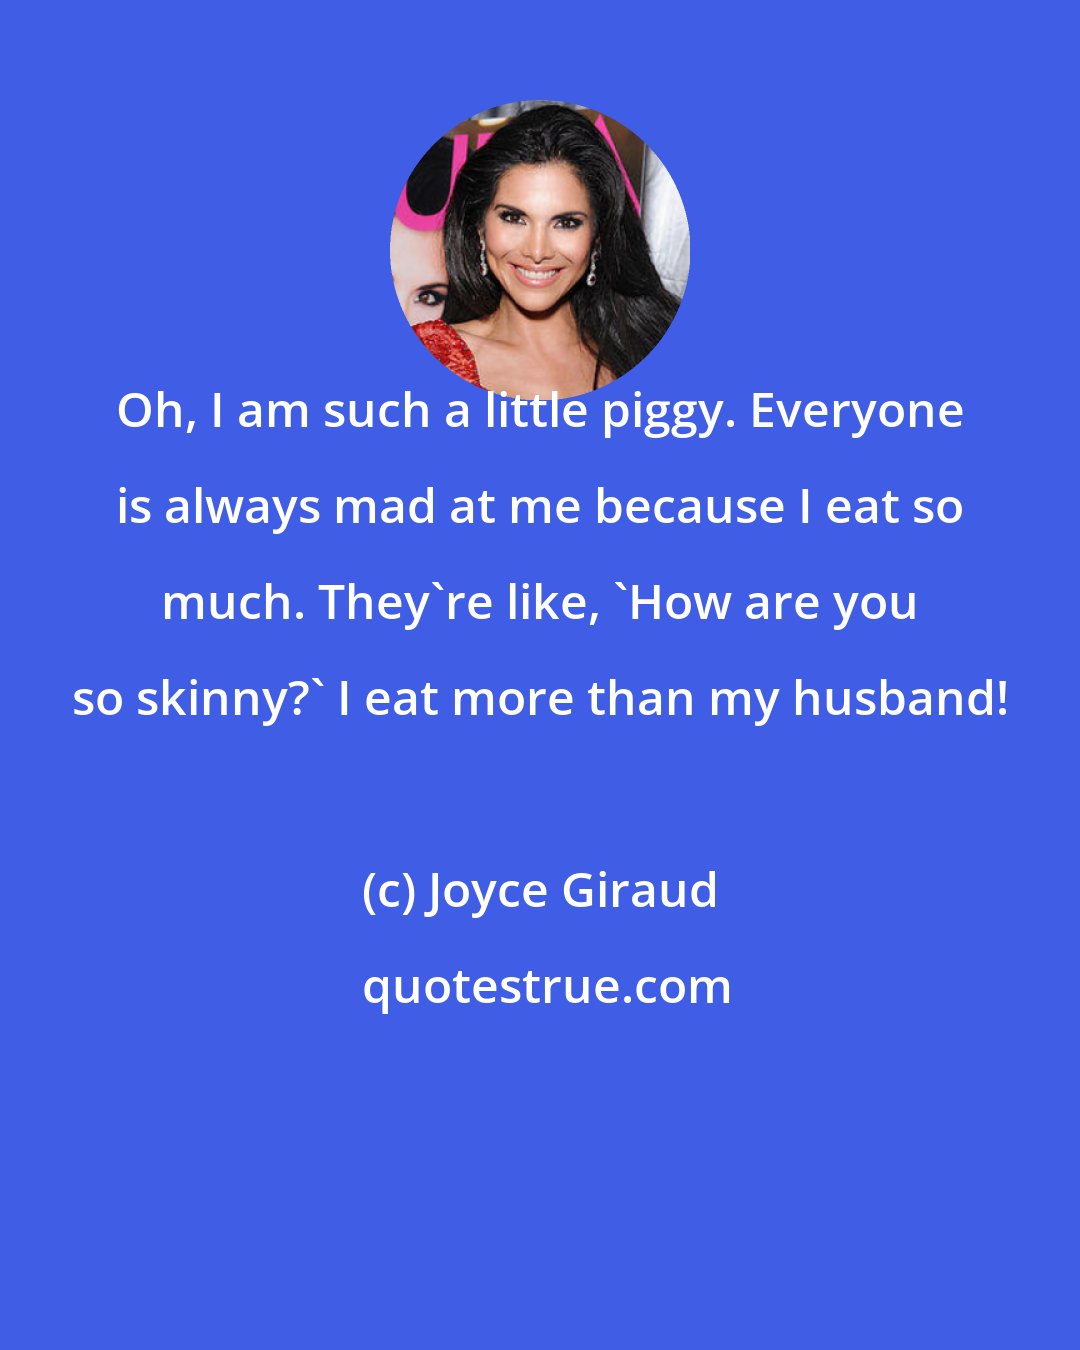 Joyce Giraud: Oh, I am such a little piggy. Everyone is always mad at me because I eat so much. They're like, 'How are you so skinny?' I eat more than my husband!